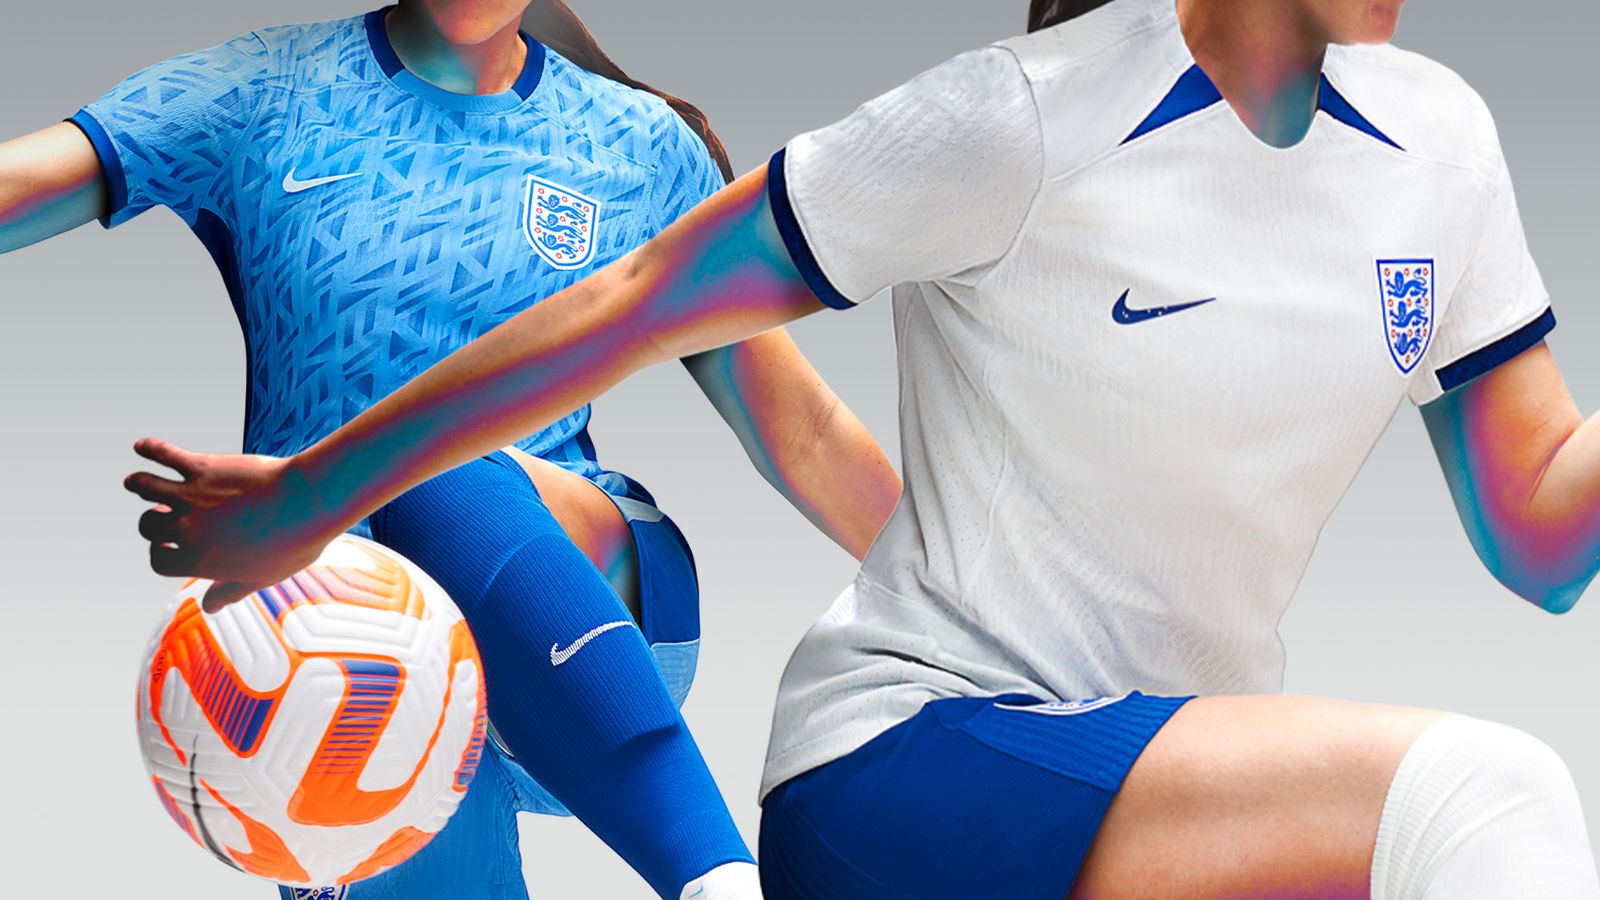 england-women-s-new-kits-switch-to-blue-shorts-from-white-shorts-after-concerns-over-periods-or-football-news